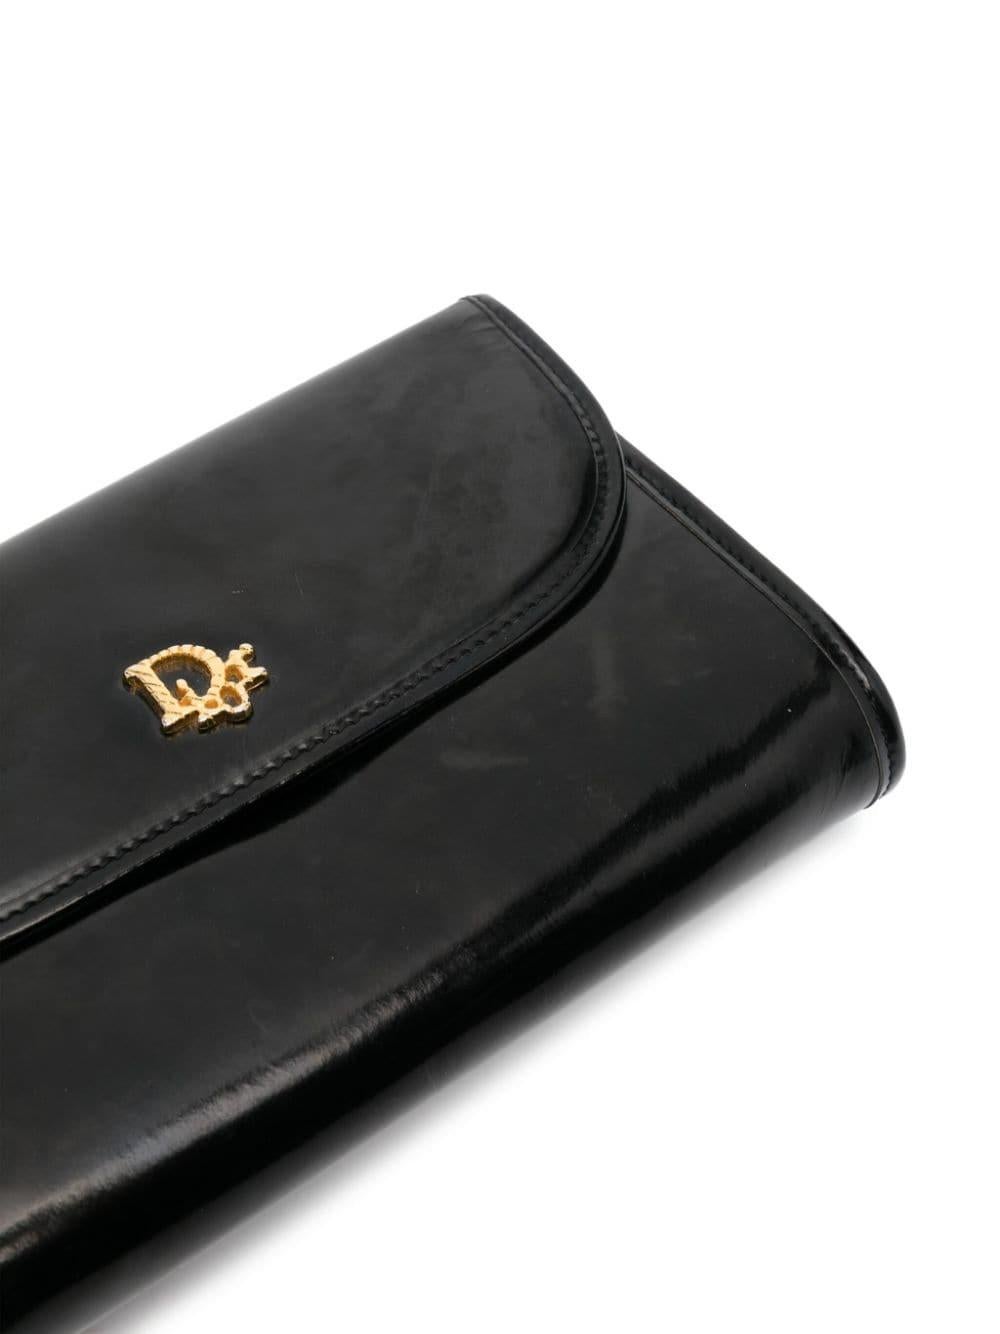 1980s Christian Dior black leather shoulder bag featuring a shiny finishing, front snap closure opening, a signature front 'Dior' plaque, a gold-tone chain-link shoulder strap, an inside gold tone logo stamp, gold-tone hardware, a foldover top with